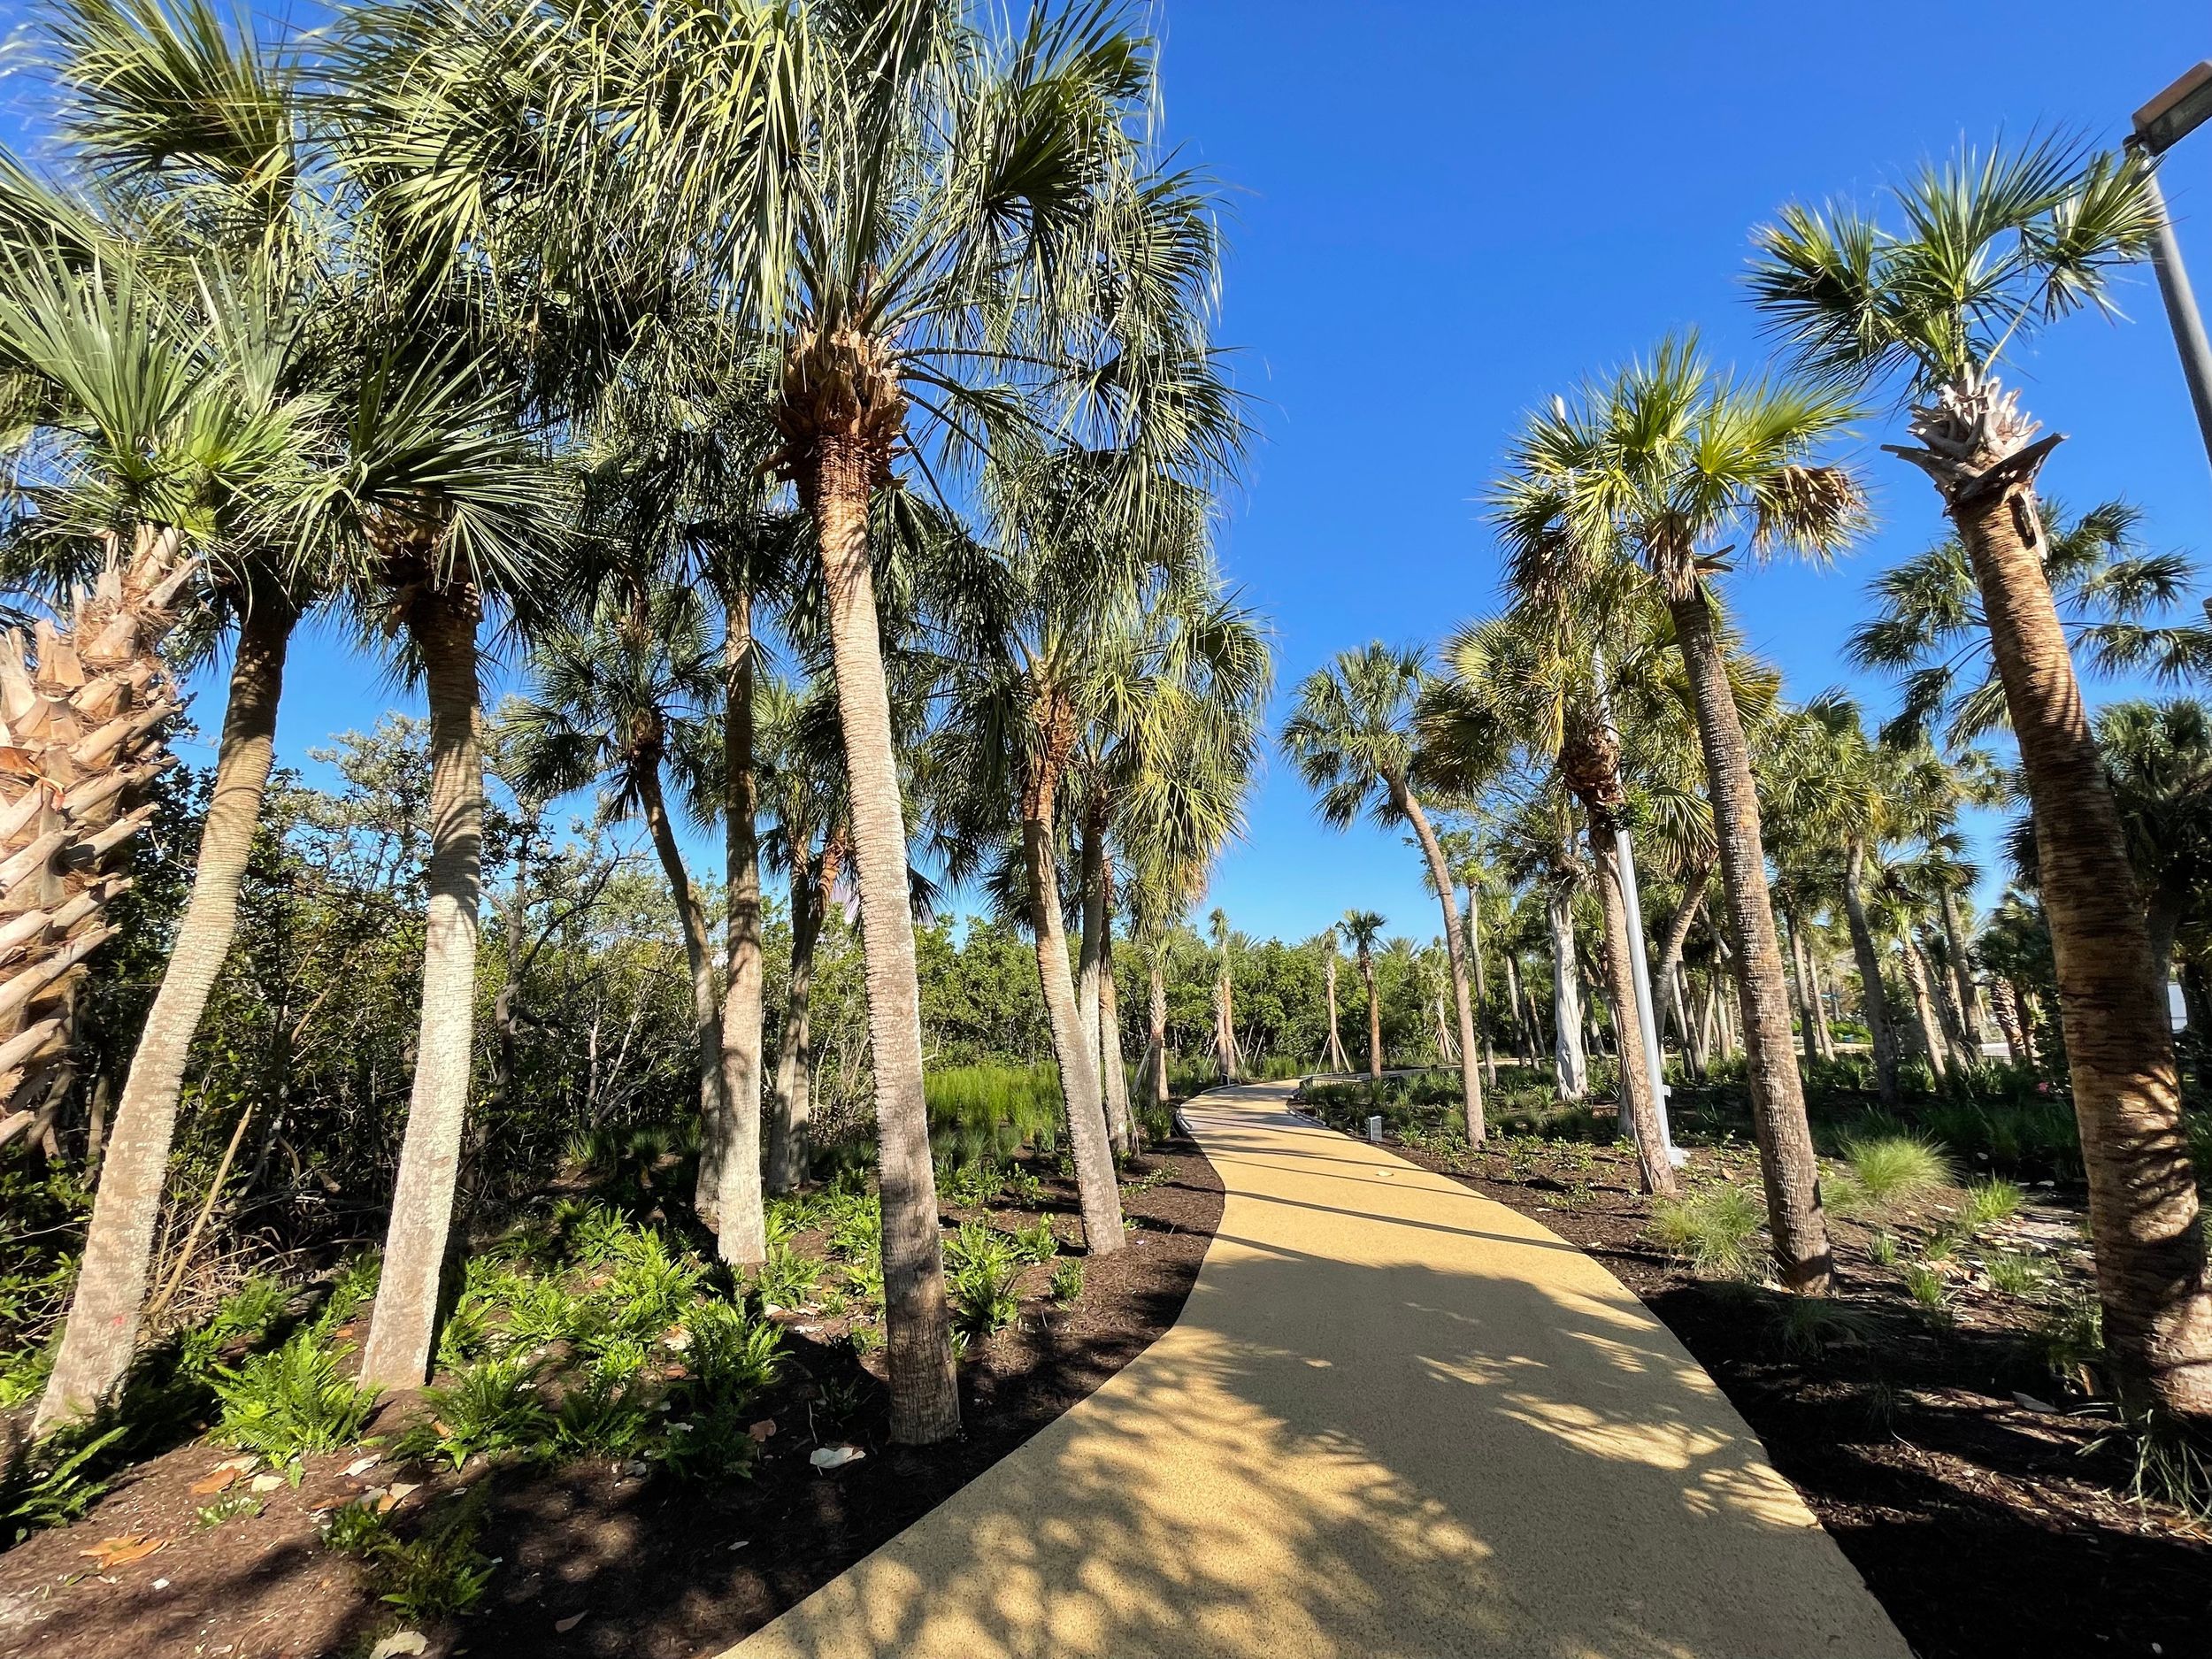 Outdoor path shaded by palm trees.